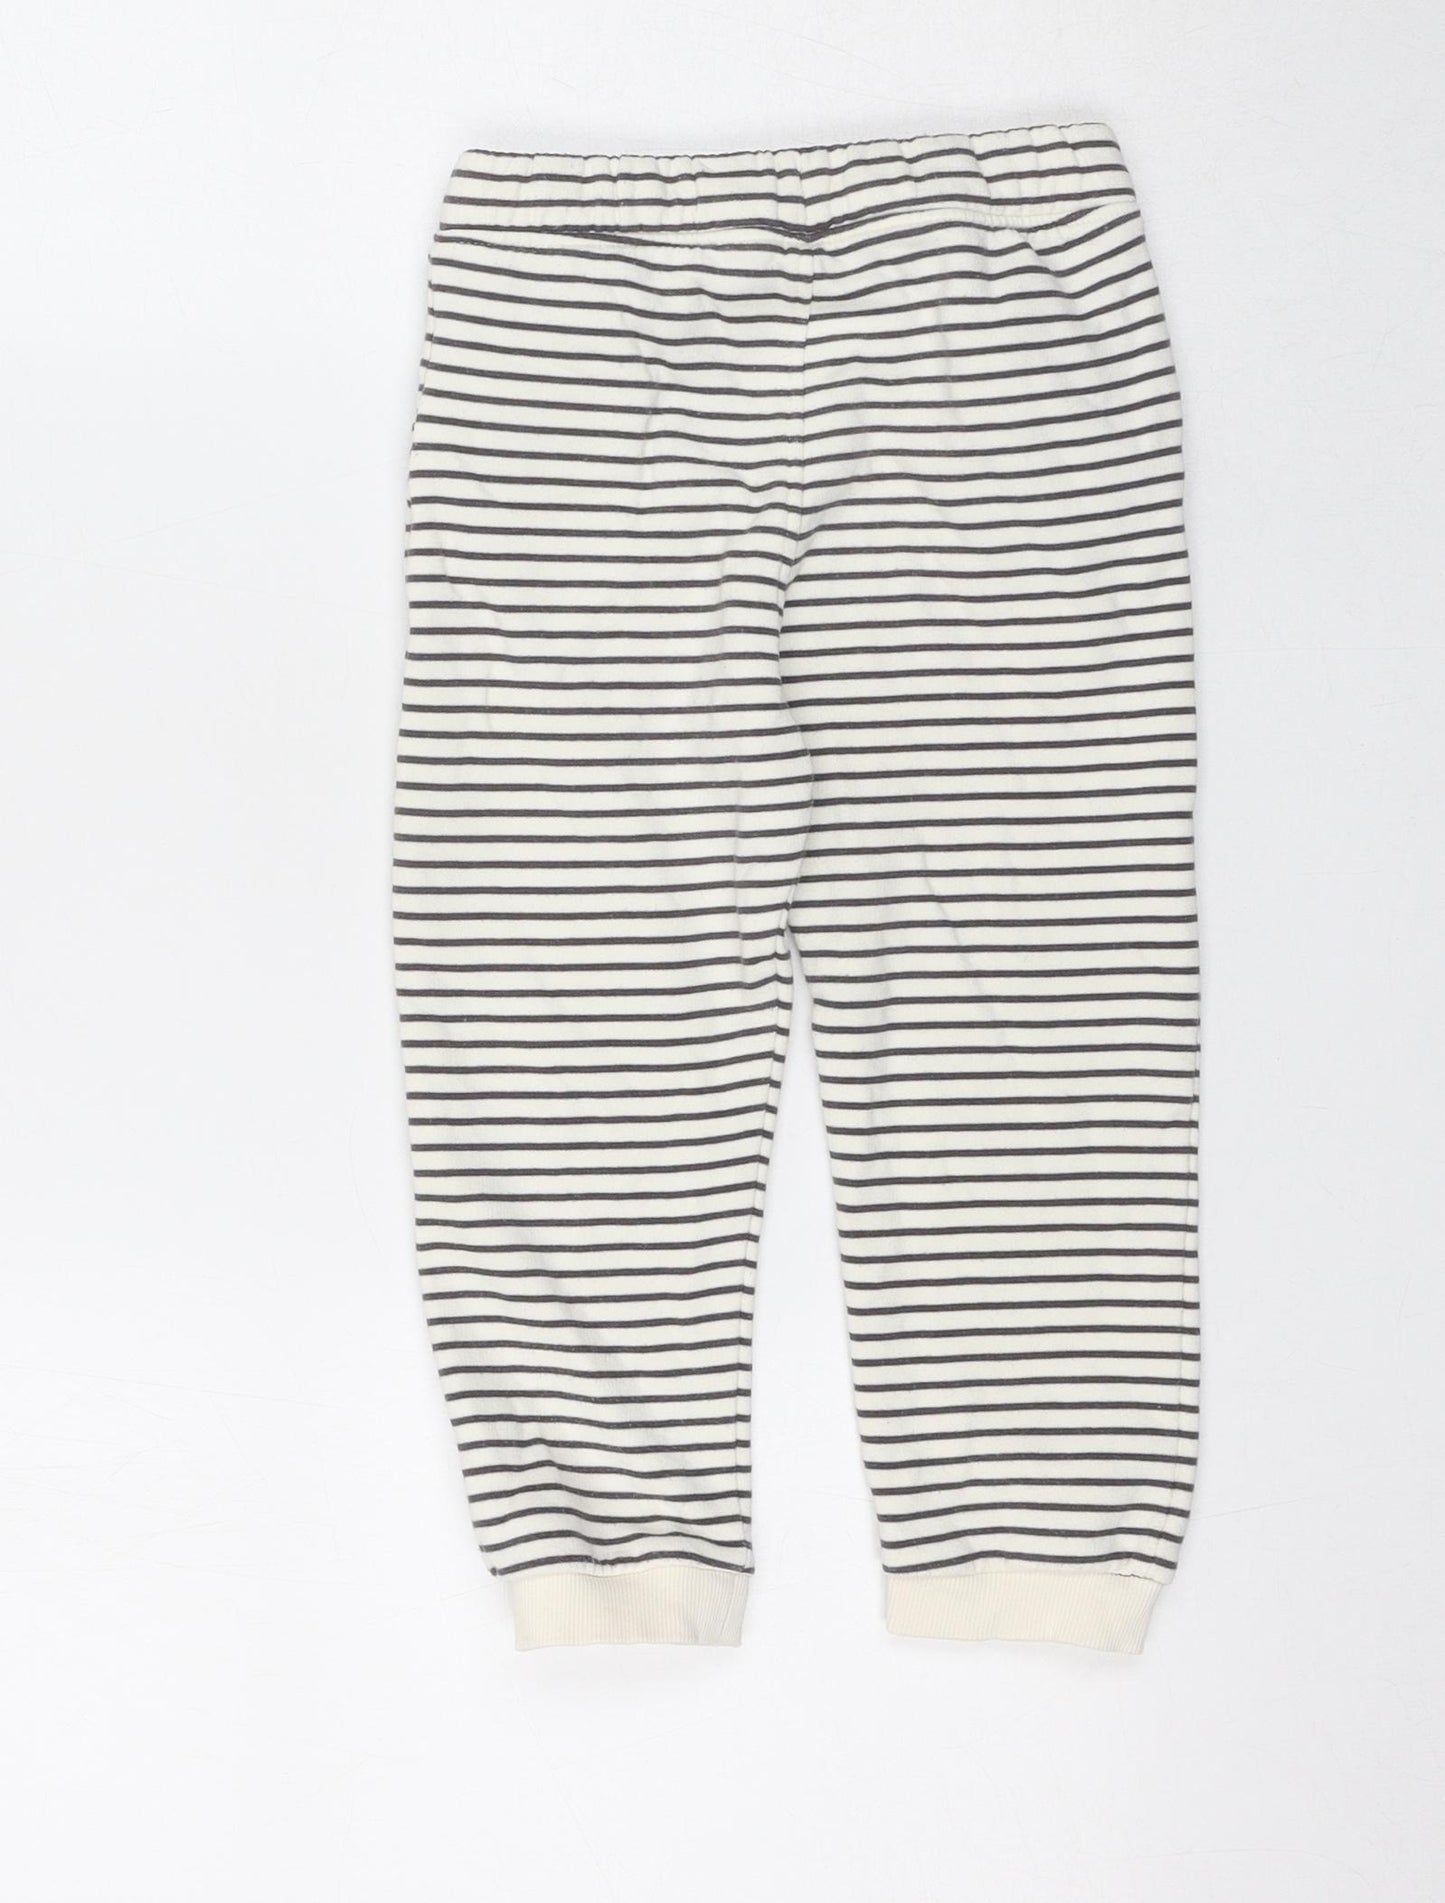 Marks and Spencer Boys Ivory Striped Cotton Jogger Trousers Size 2-3 Years Regular Pullover